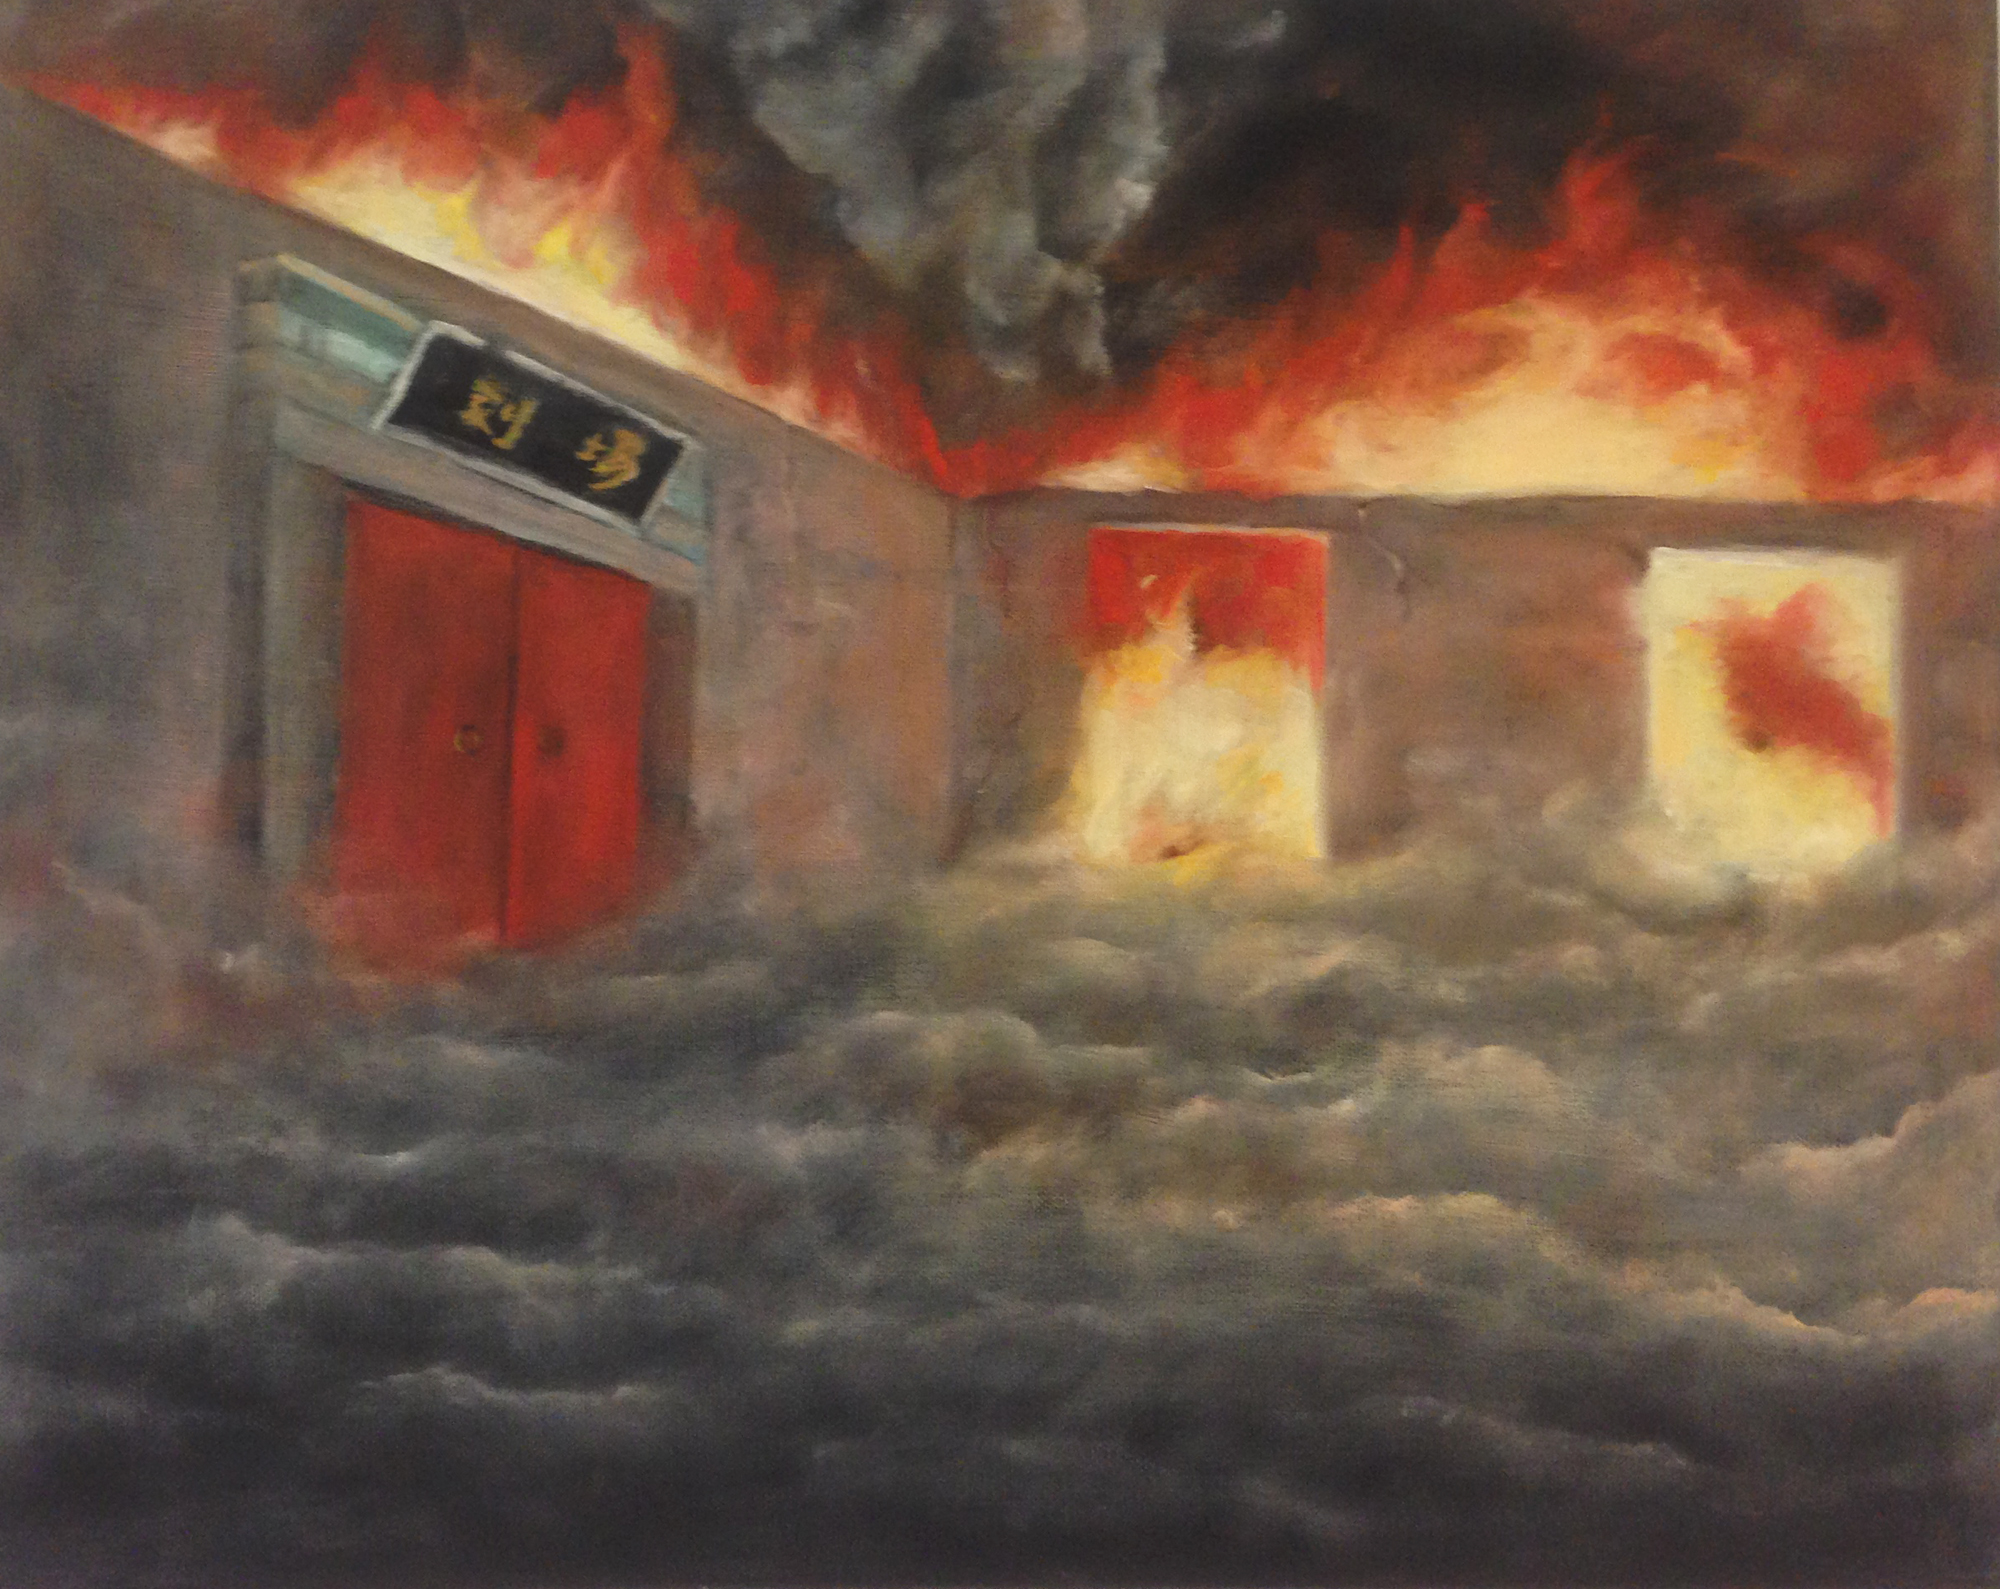 My painting – the burning theater